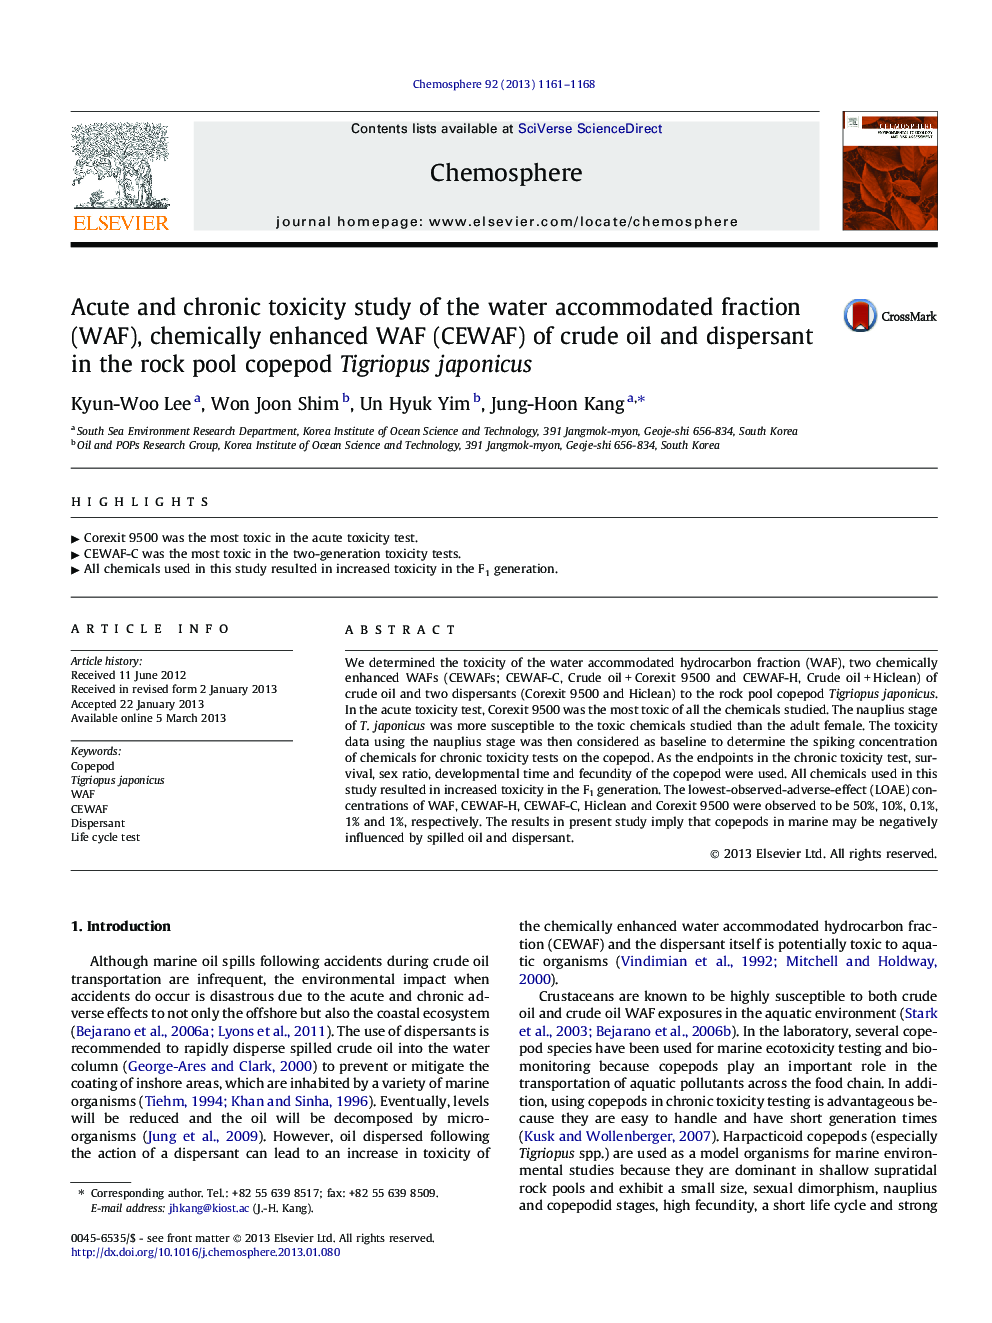 Acute and chronic toxicity study of the water accommodated fraction (WAF), chemically enhanced WAF (CEWAF) of crude oil and dispersant in the rock pool copepod Tigriopus japonicus